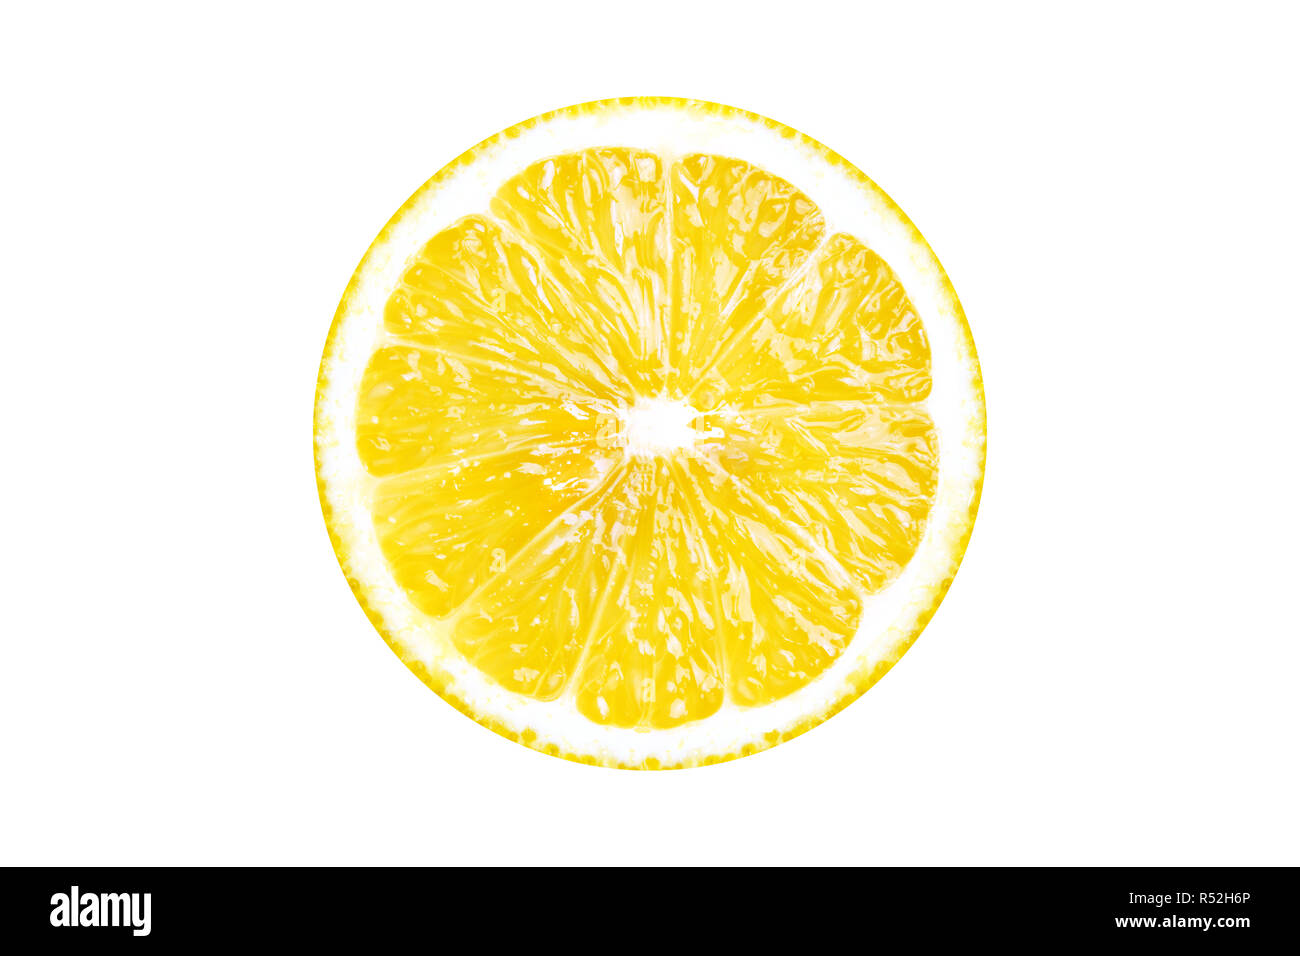 Close-up of a yellow Lemon isolated on a white Background. Stock Photo